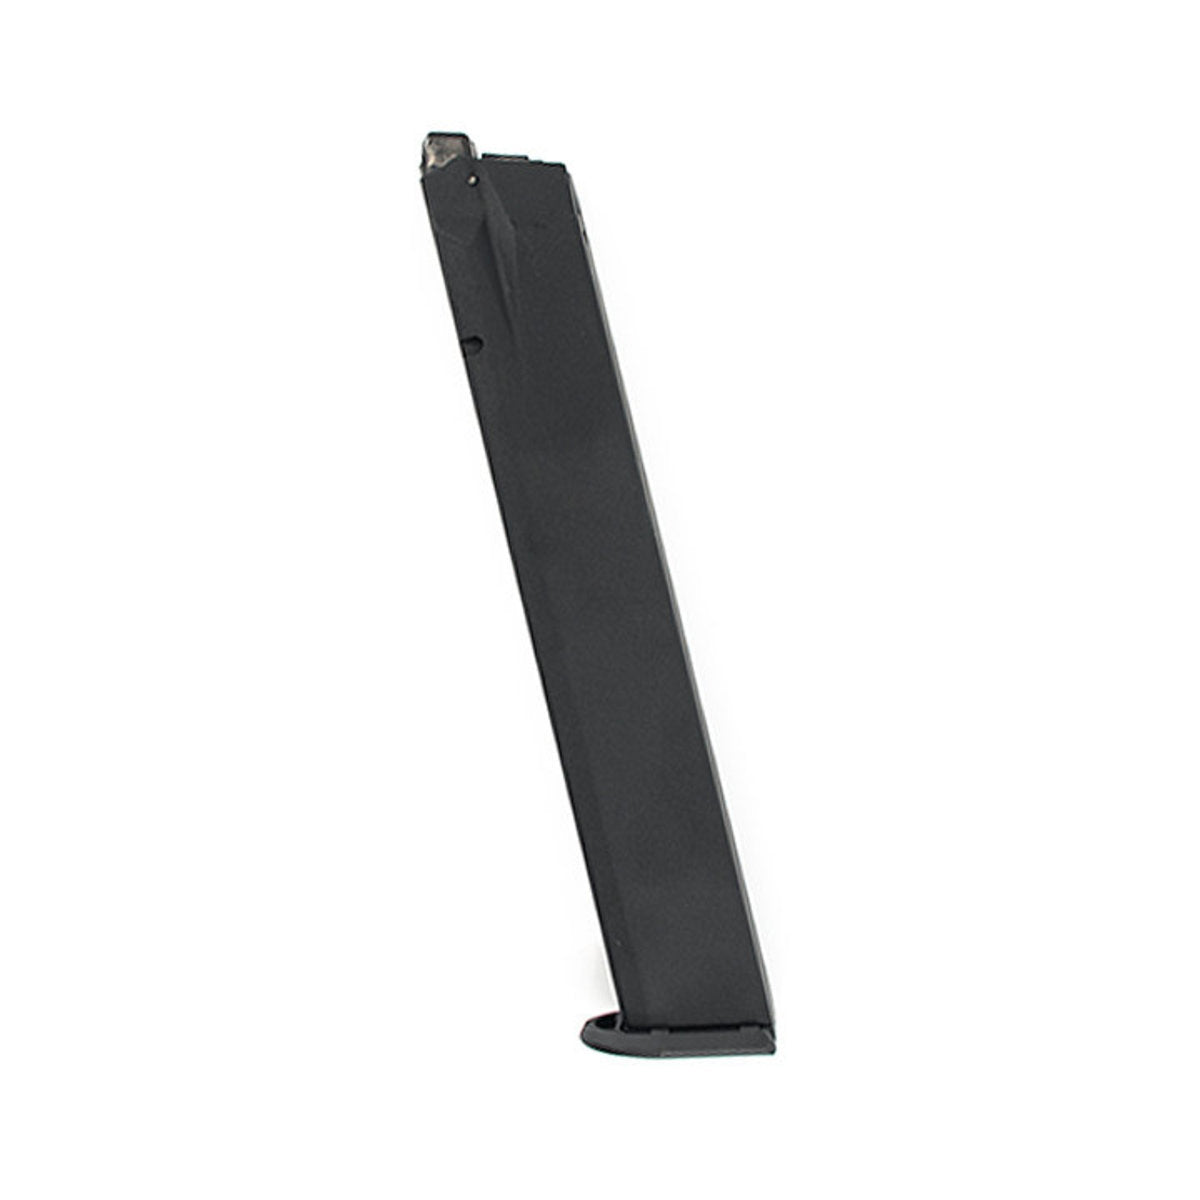 Umarex 45Rd Walther Ppq M2 Gbb Extended Airsoft Magazine (Vfc)